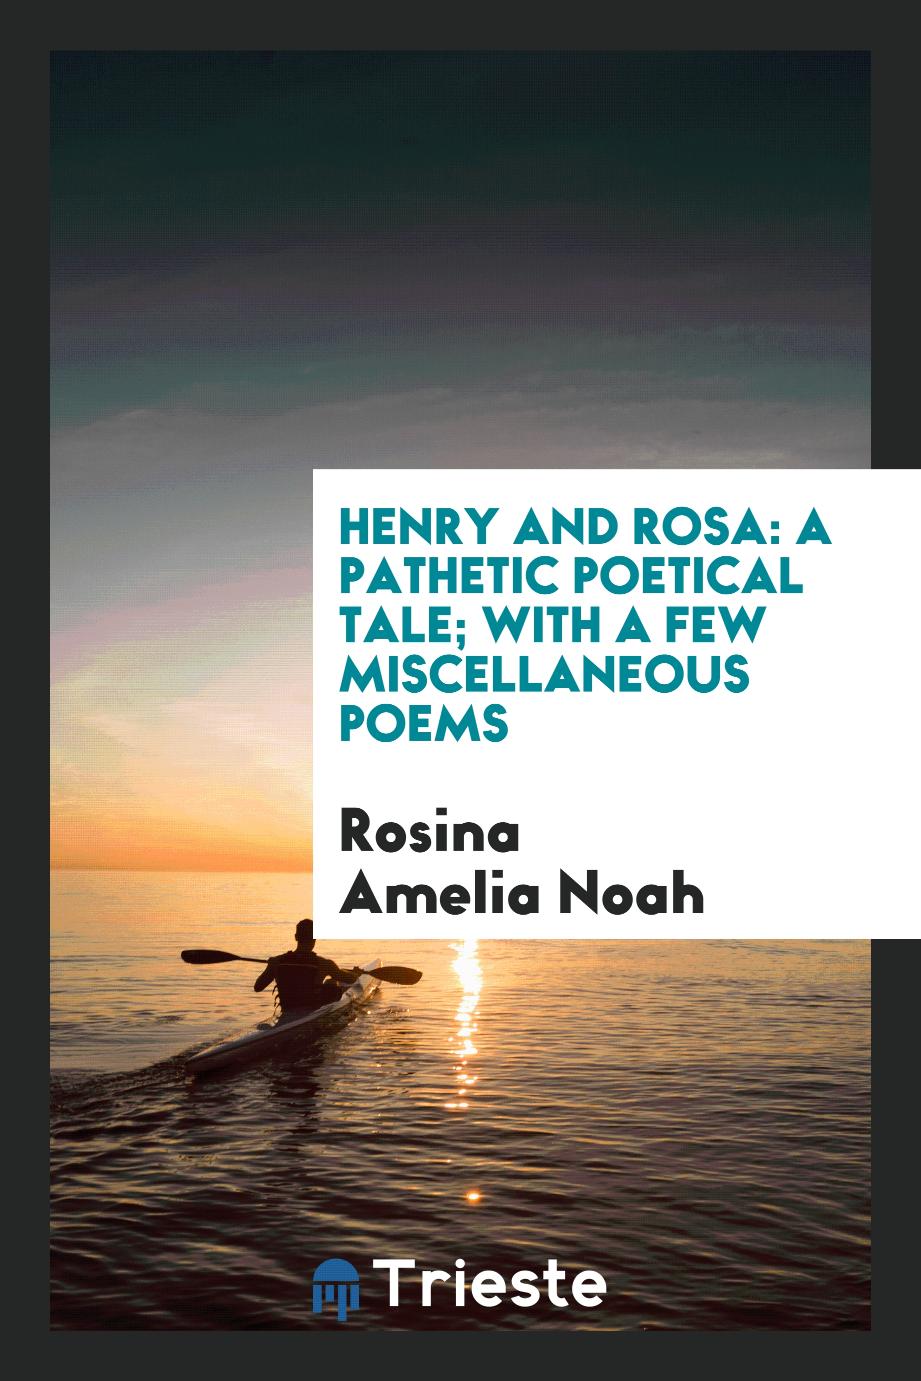 Henry and Rosa: a pathetic poetical tale; with a few miscellaneous poems